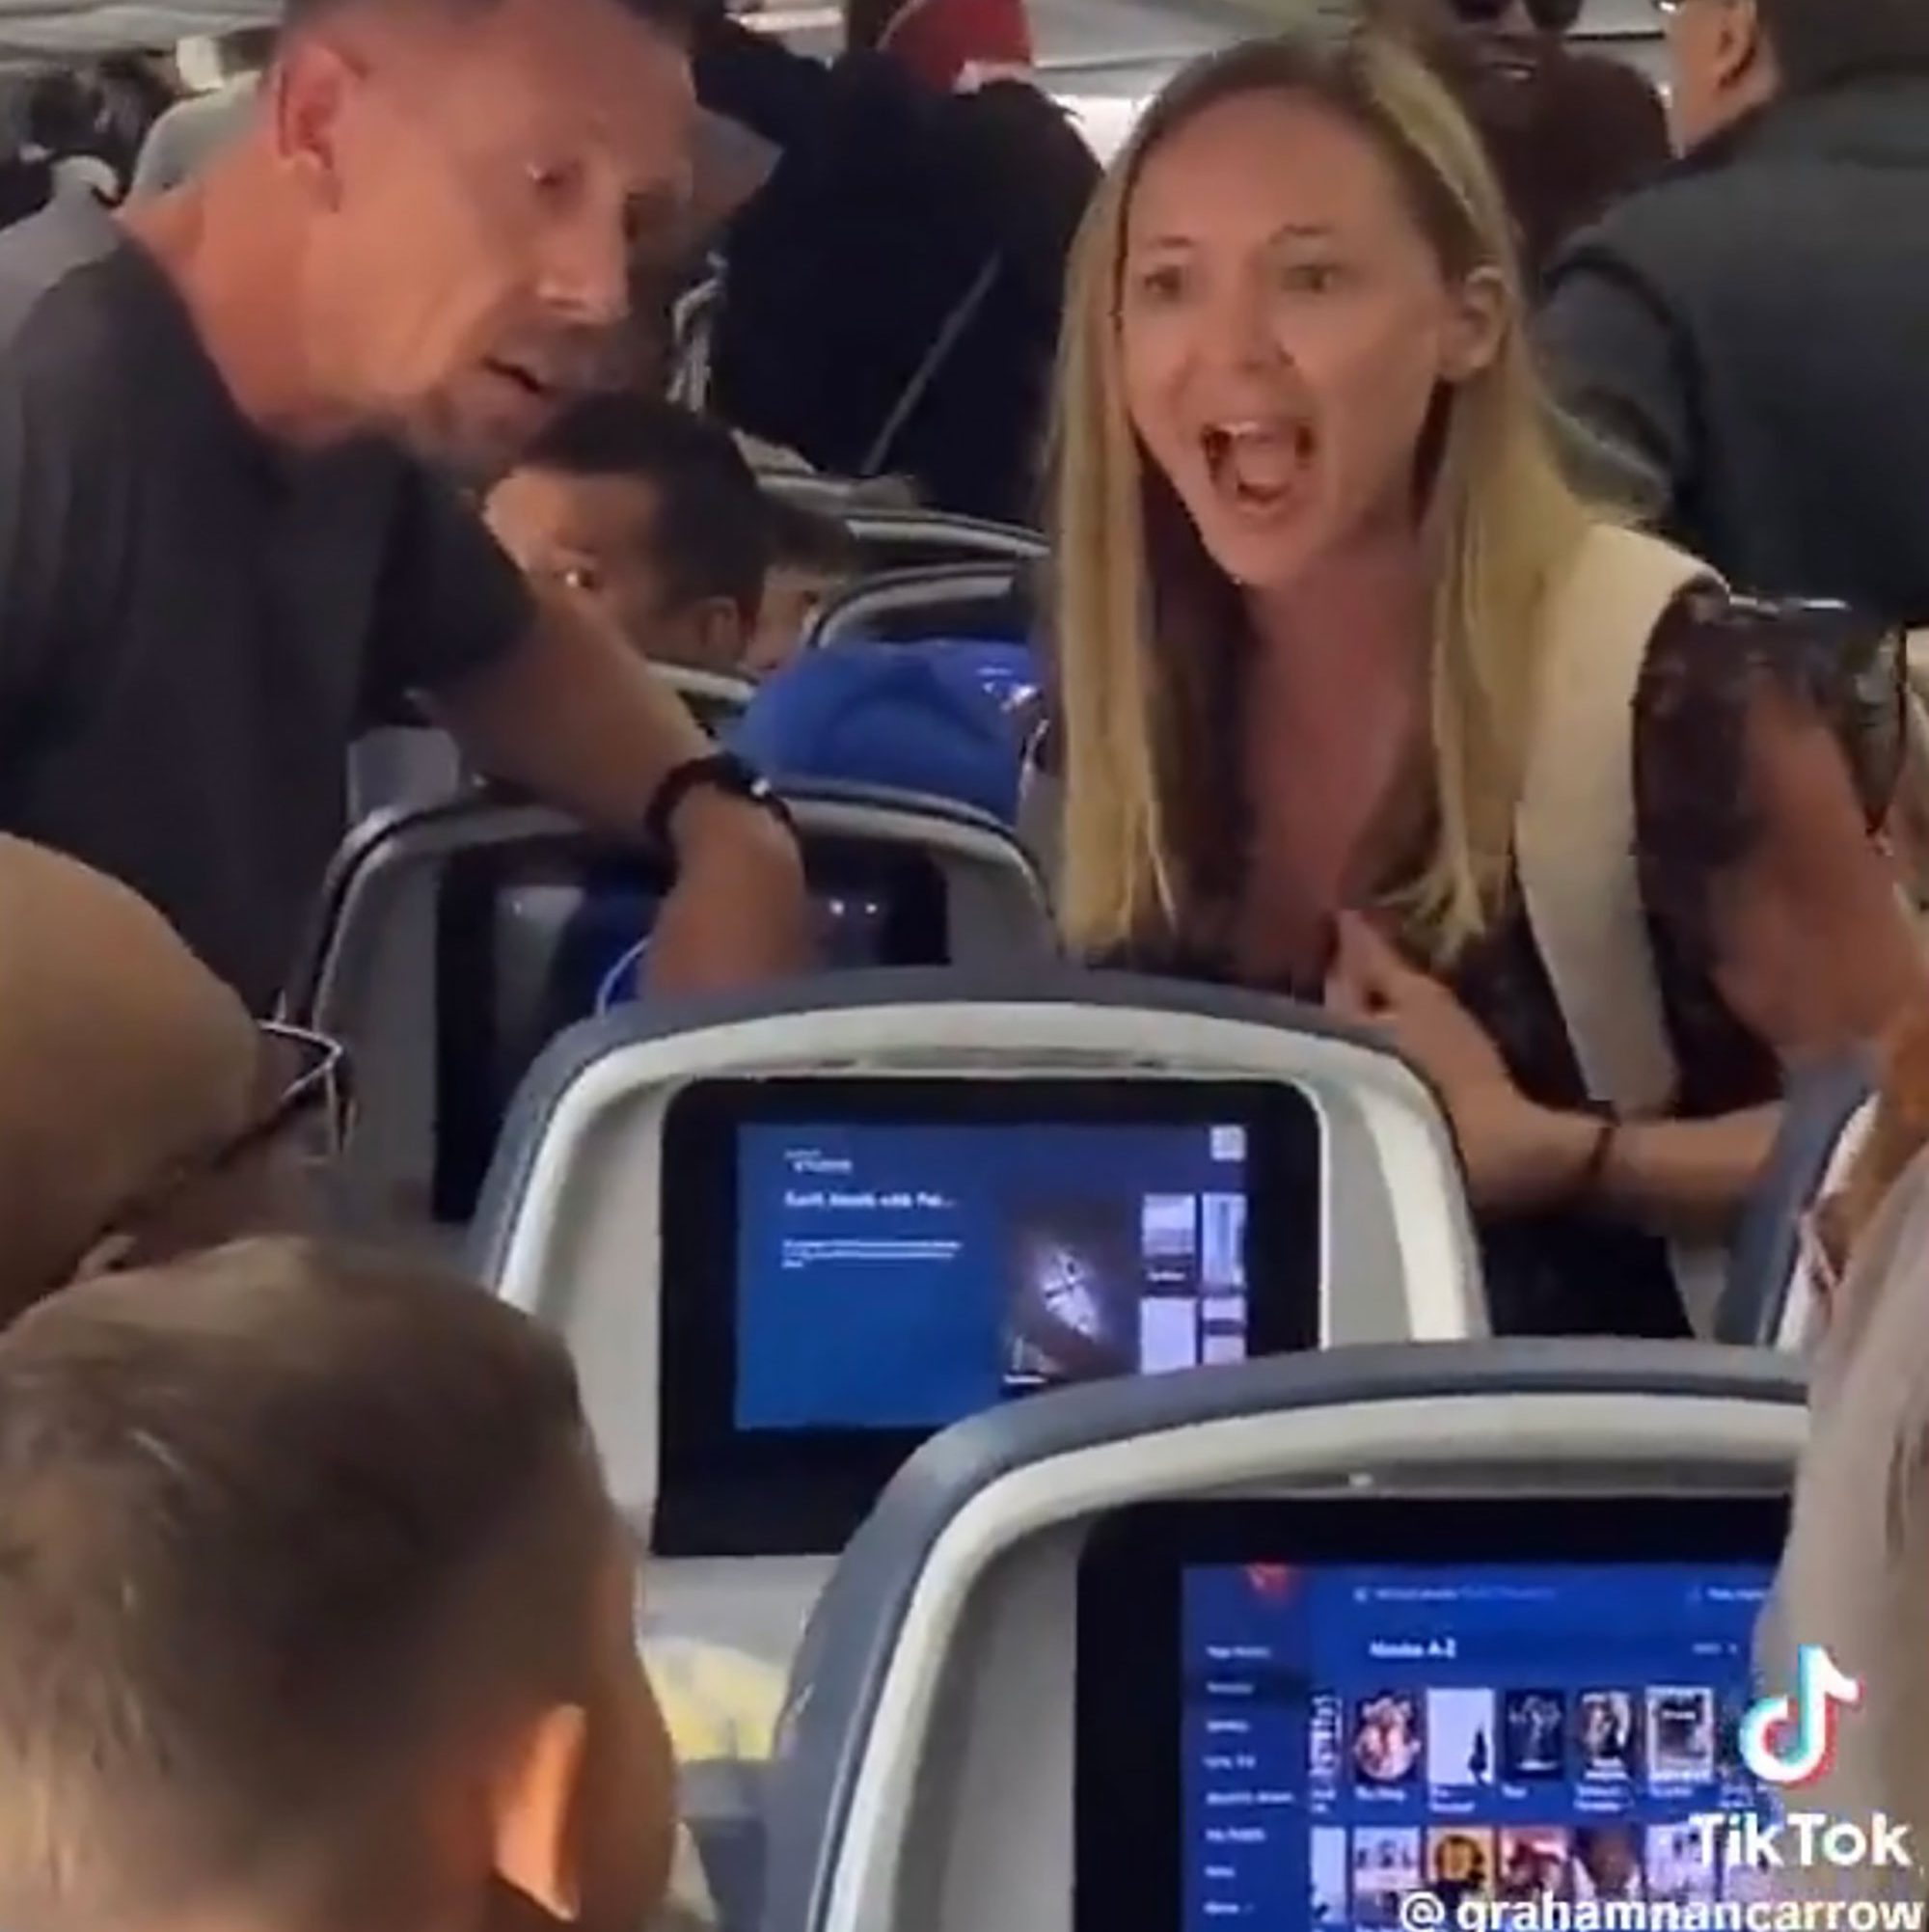 The woman was irate at the people behind her, who she said kicked her seat the whole flight